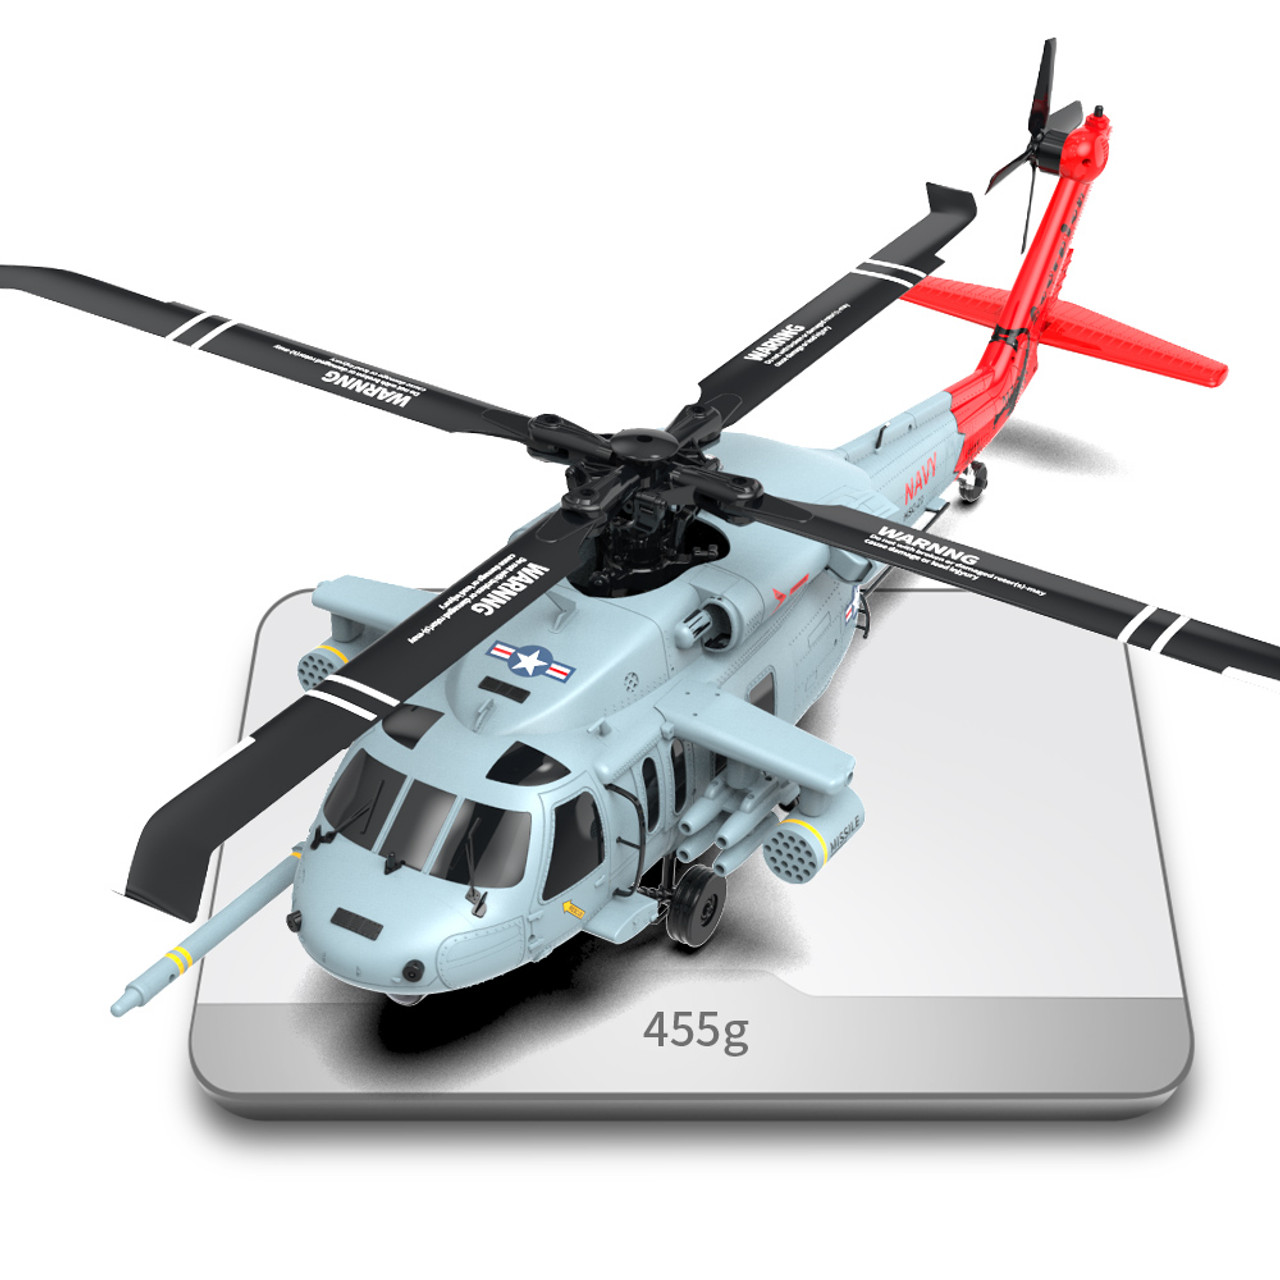 YXZNRC F09-H SH60 Black Hawk 1/47 Scale Aircraft 2.4G 8CH 6-Axis Gyro GPS  5.8G image Transmission Helicopter